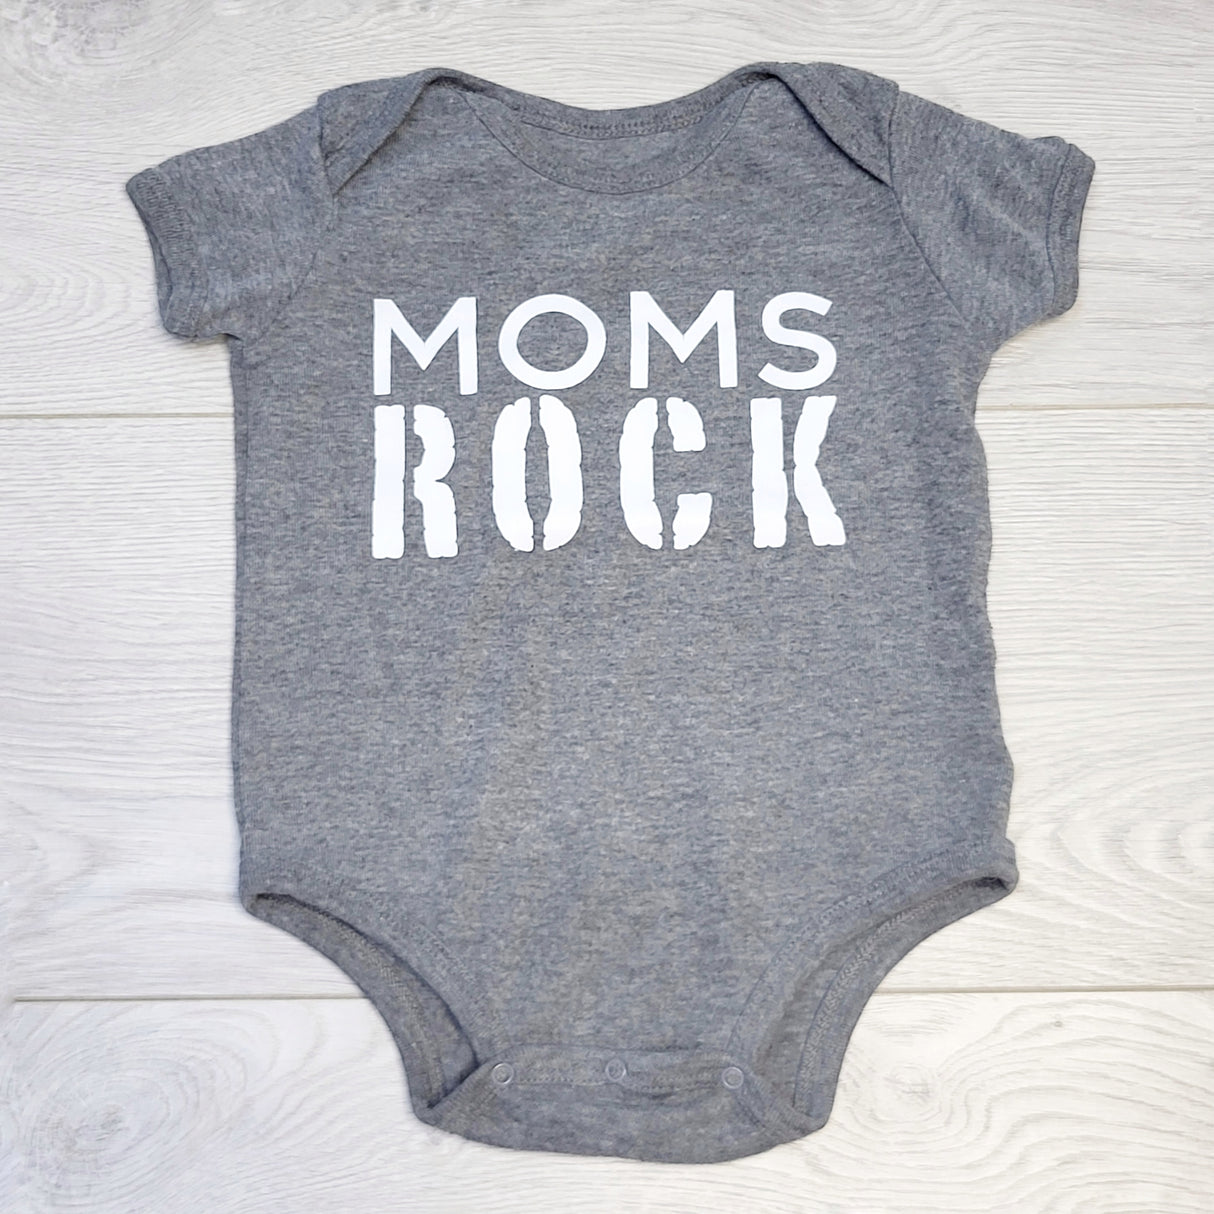 CHOL1 - Thyme Maternity grey "Moms Rock" onesie, one size fits all